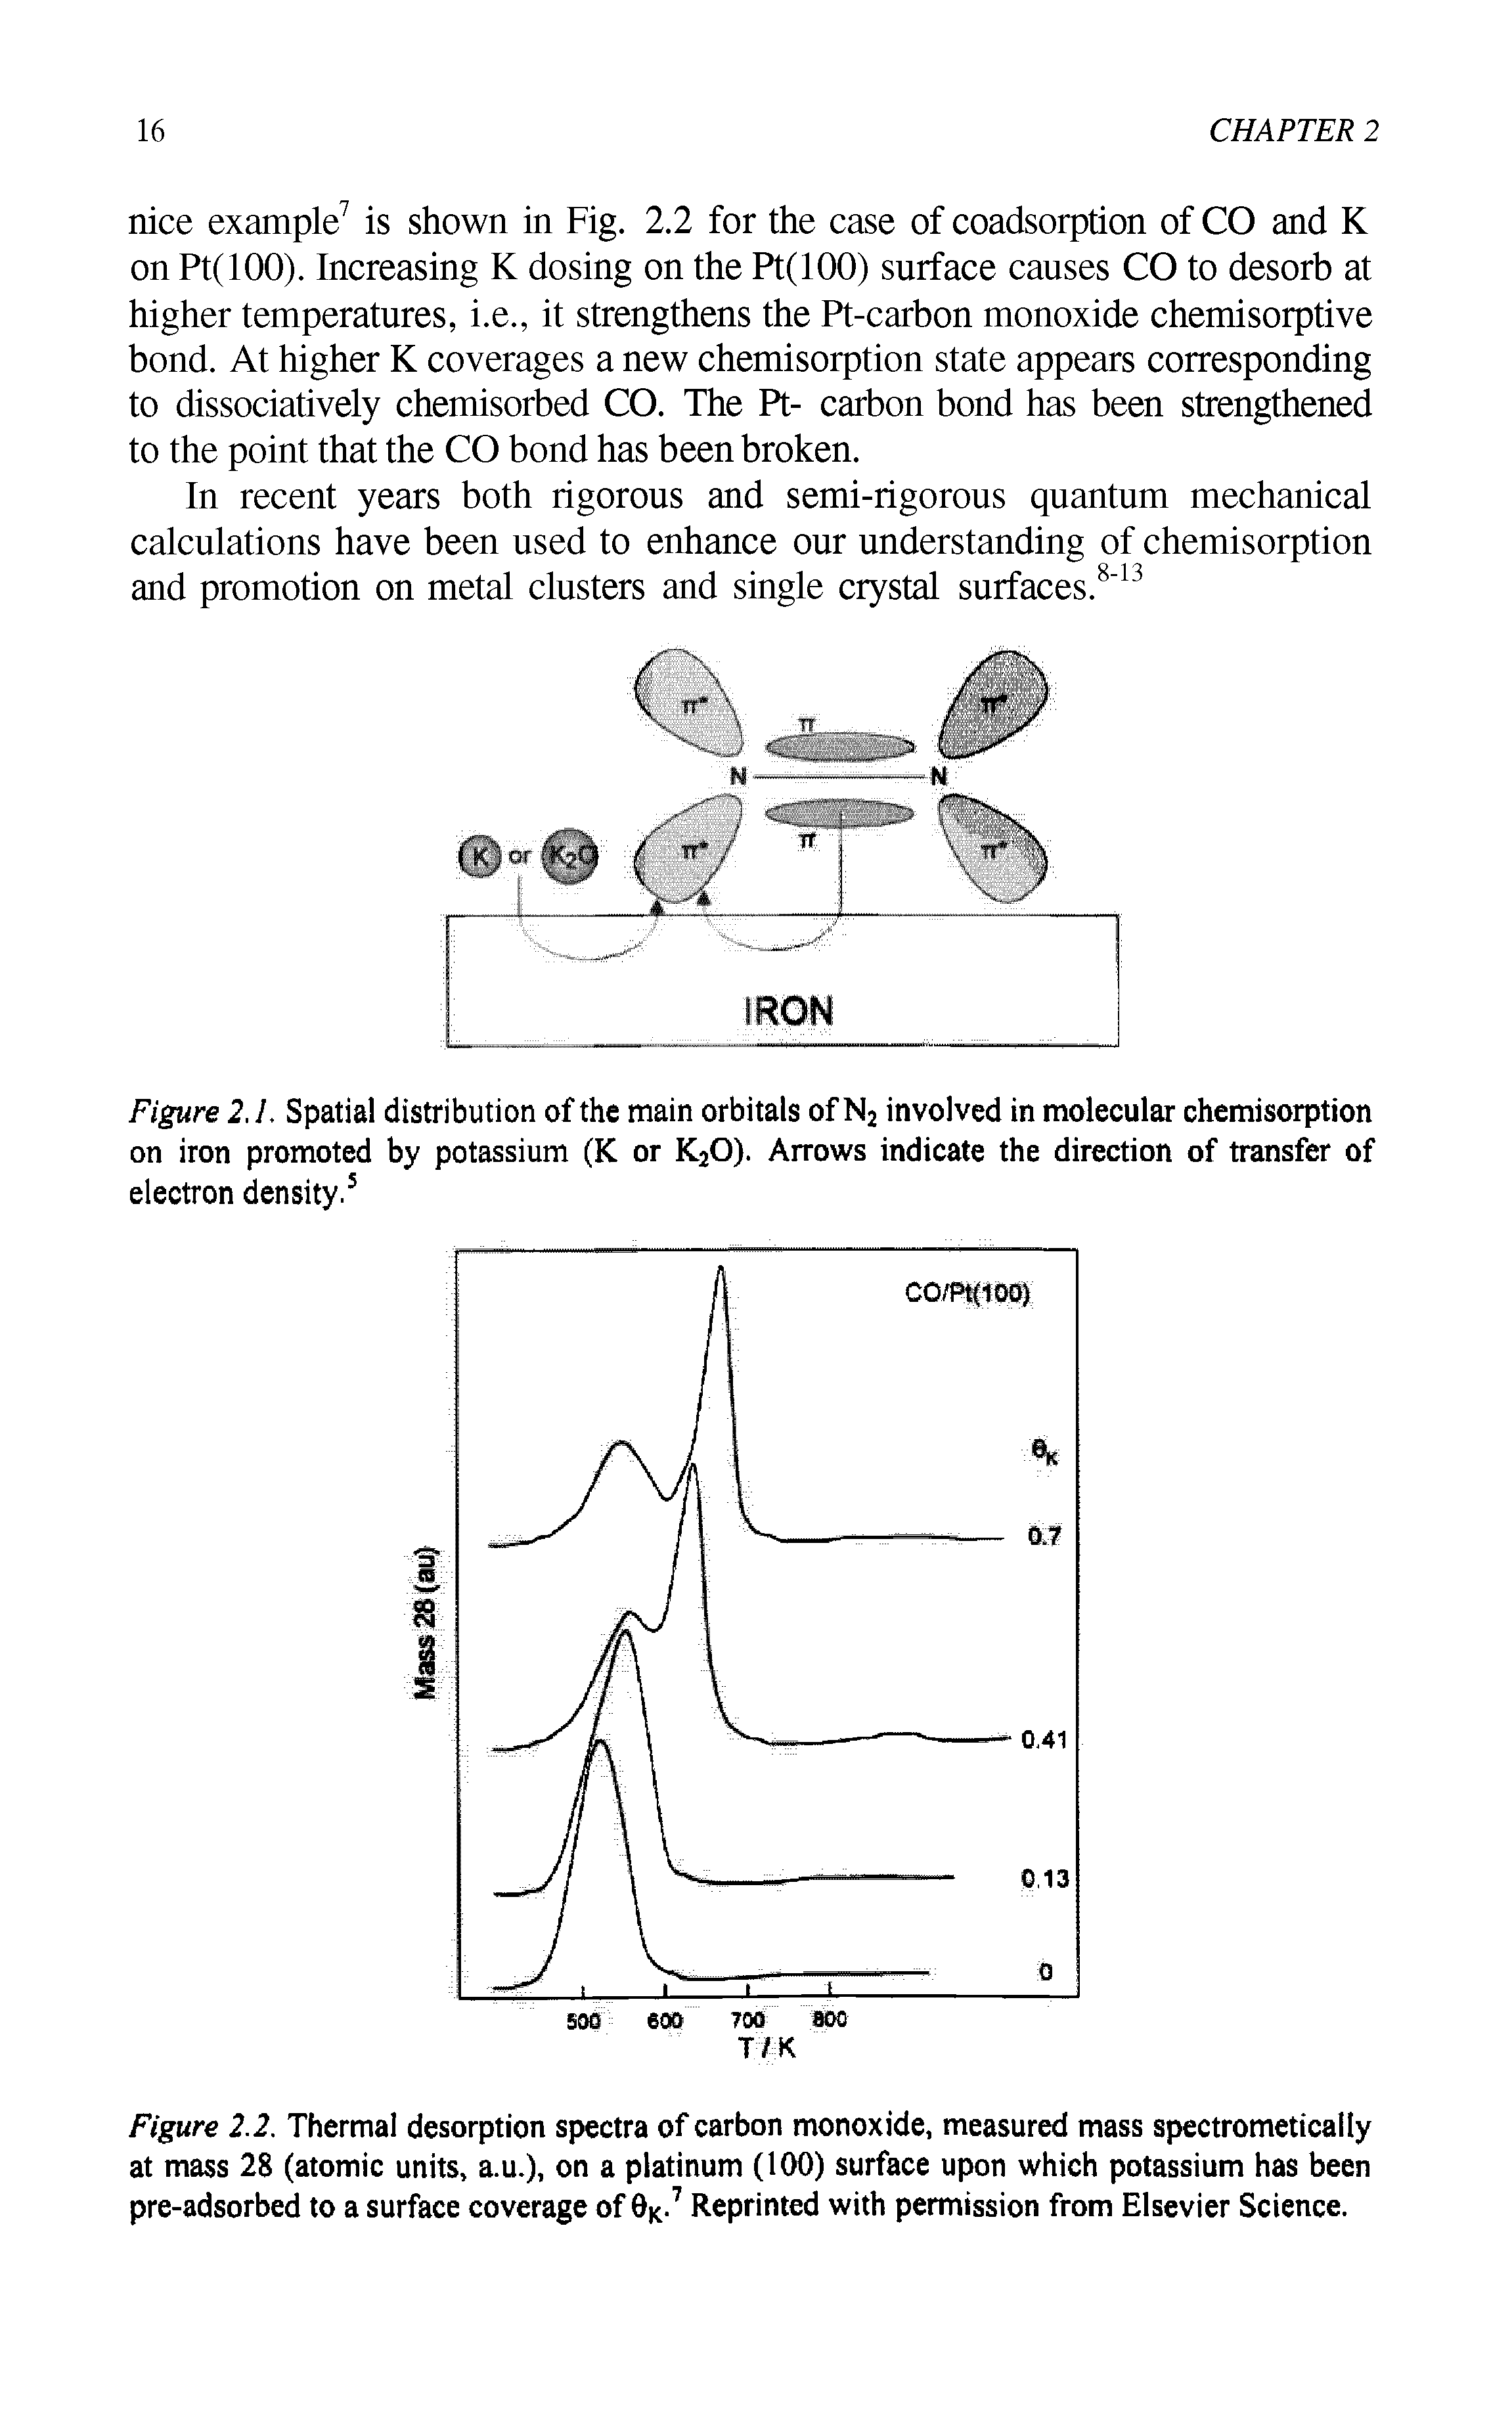 Figure 2. I. Spatial distribution of the main orbitals of N2 involved in molecular chemisorption on iron promoted by potassium (K or K20). Arrows indicate the direction of transfer of electron density.5...